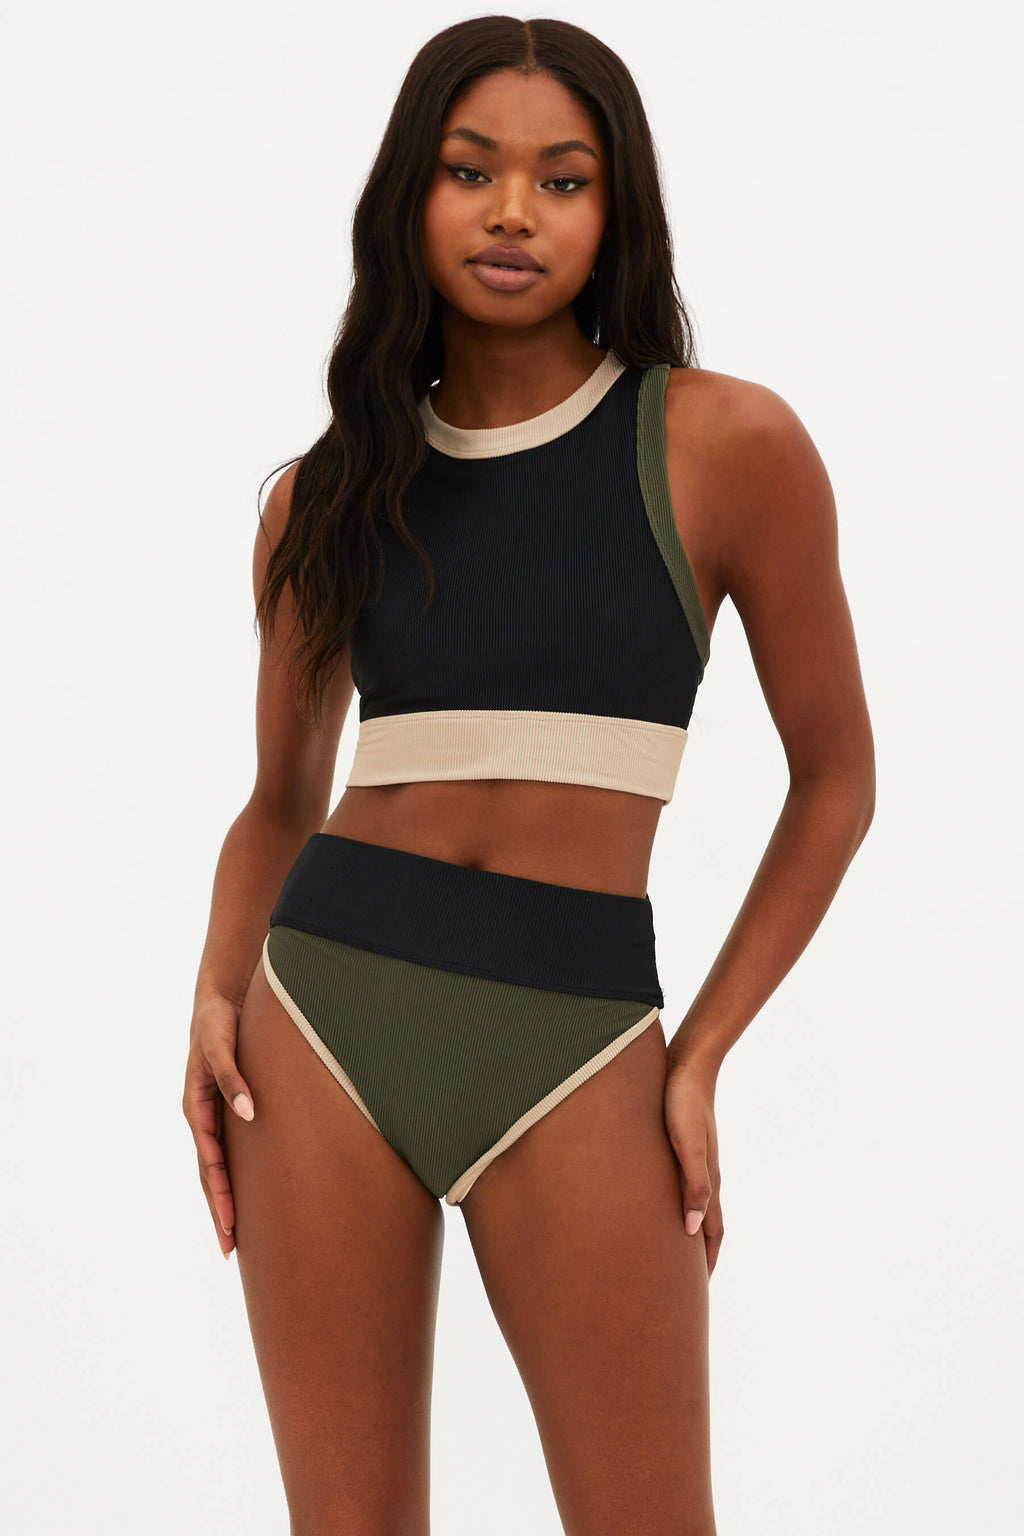 collection_new-swim-arrivals collection_swim-tops collection_swimwear collection_new-swim-arrivals collection_best-sellers-swim